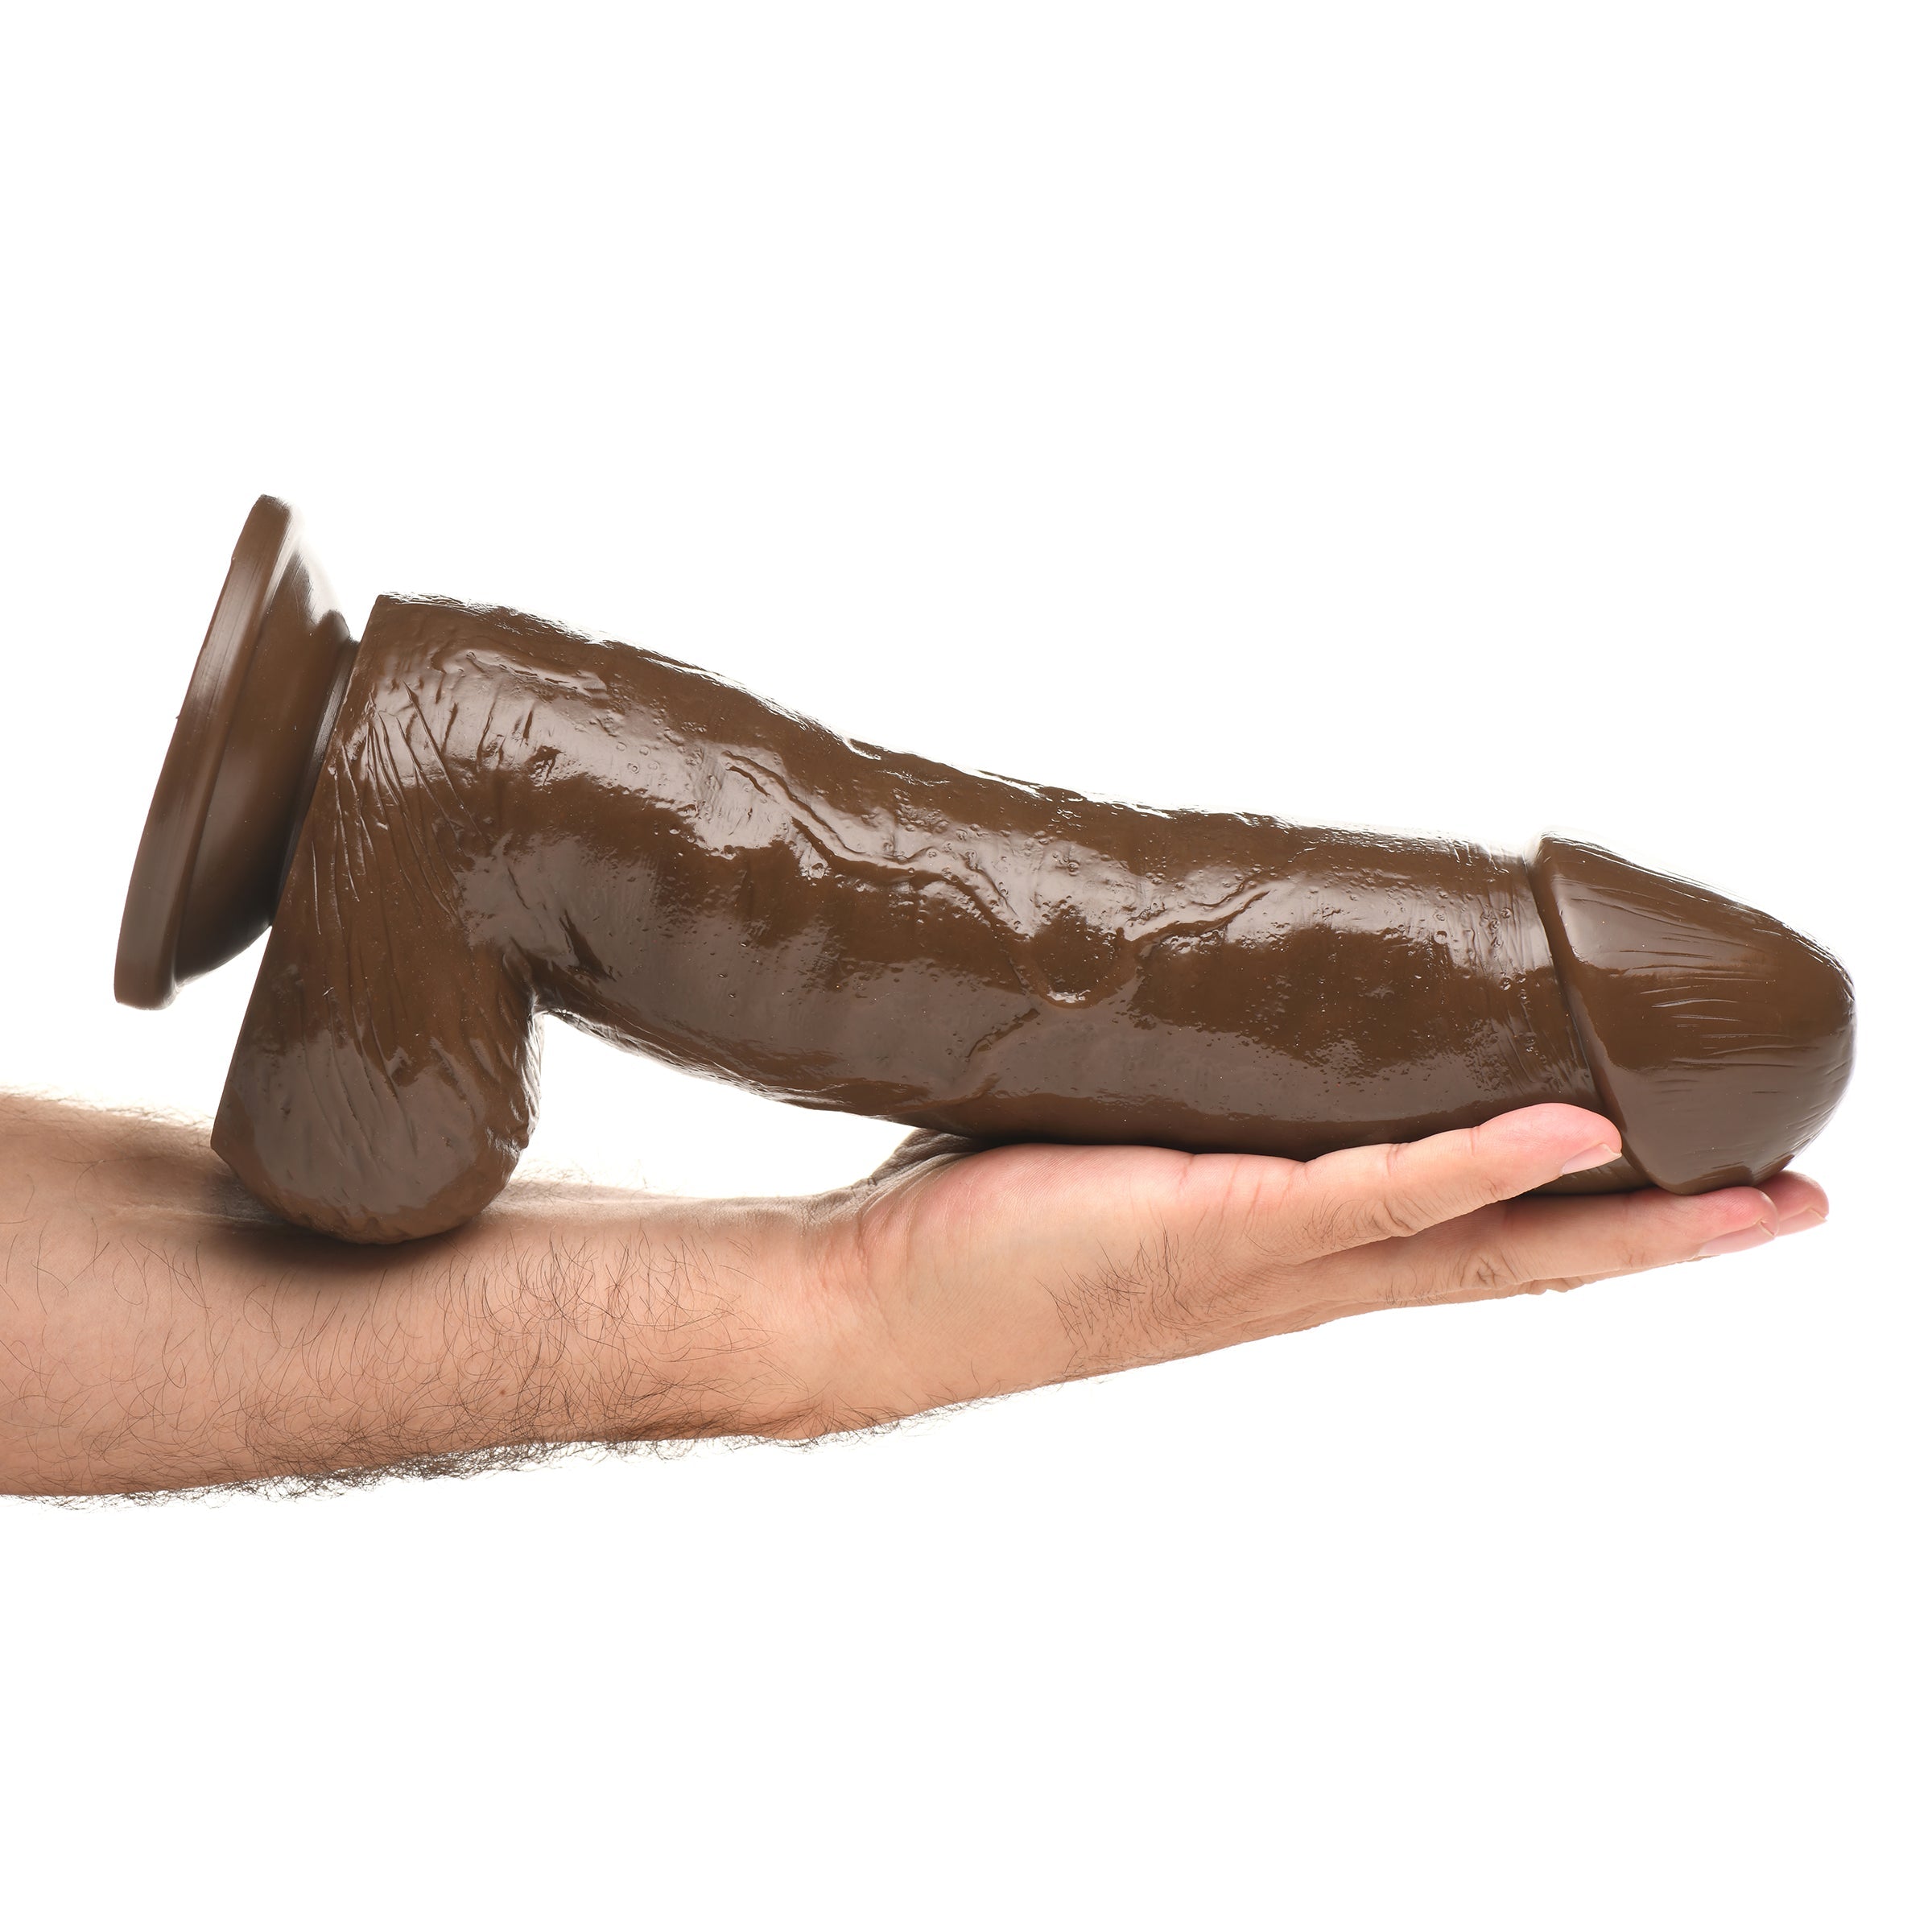 Forearm Huge Suction Cup Dildo